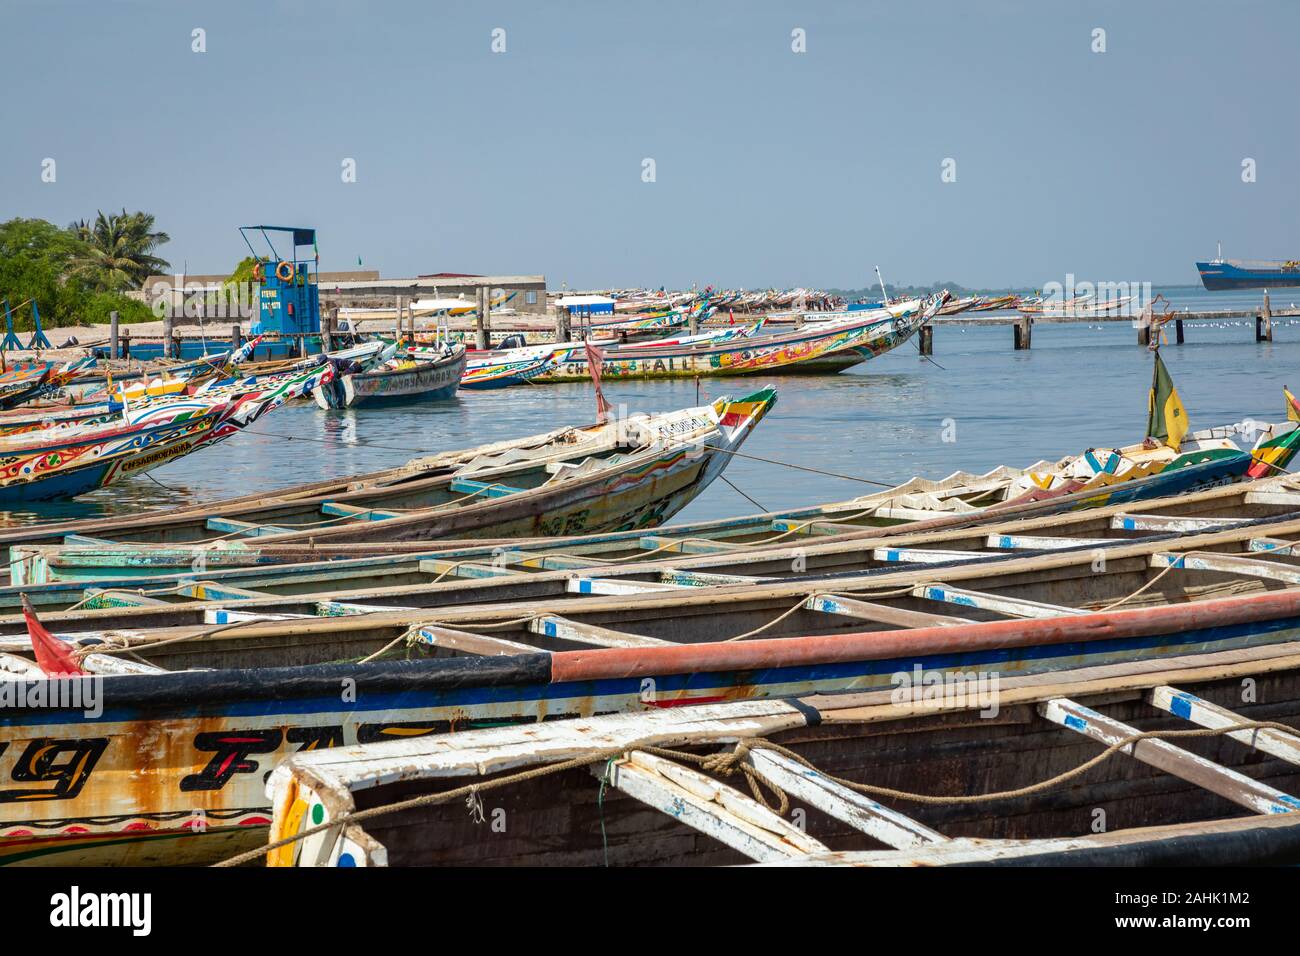 Traditional painted wooden fishing boat in Djiffer, Senegal. West Africa. Stock Photo